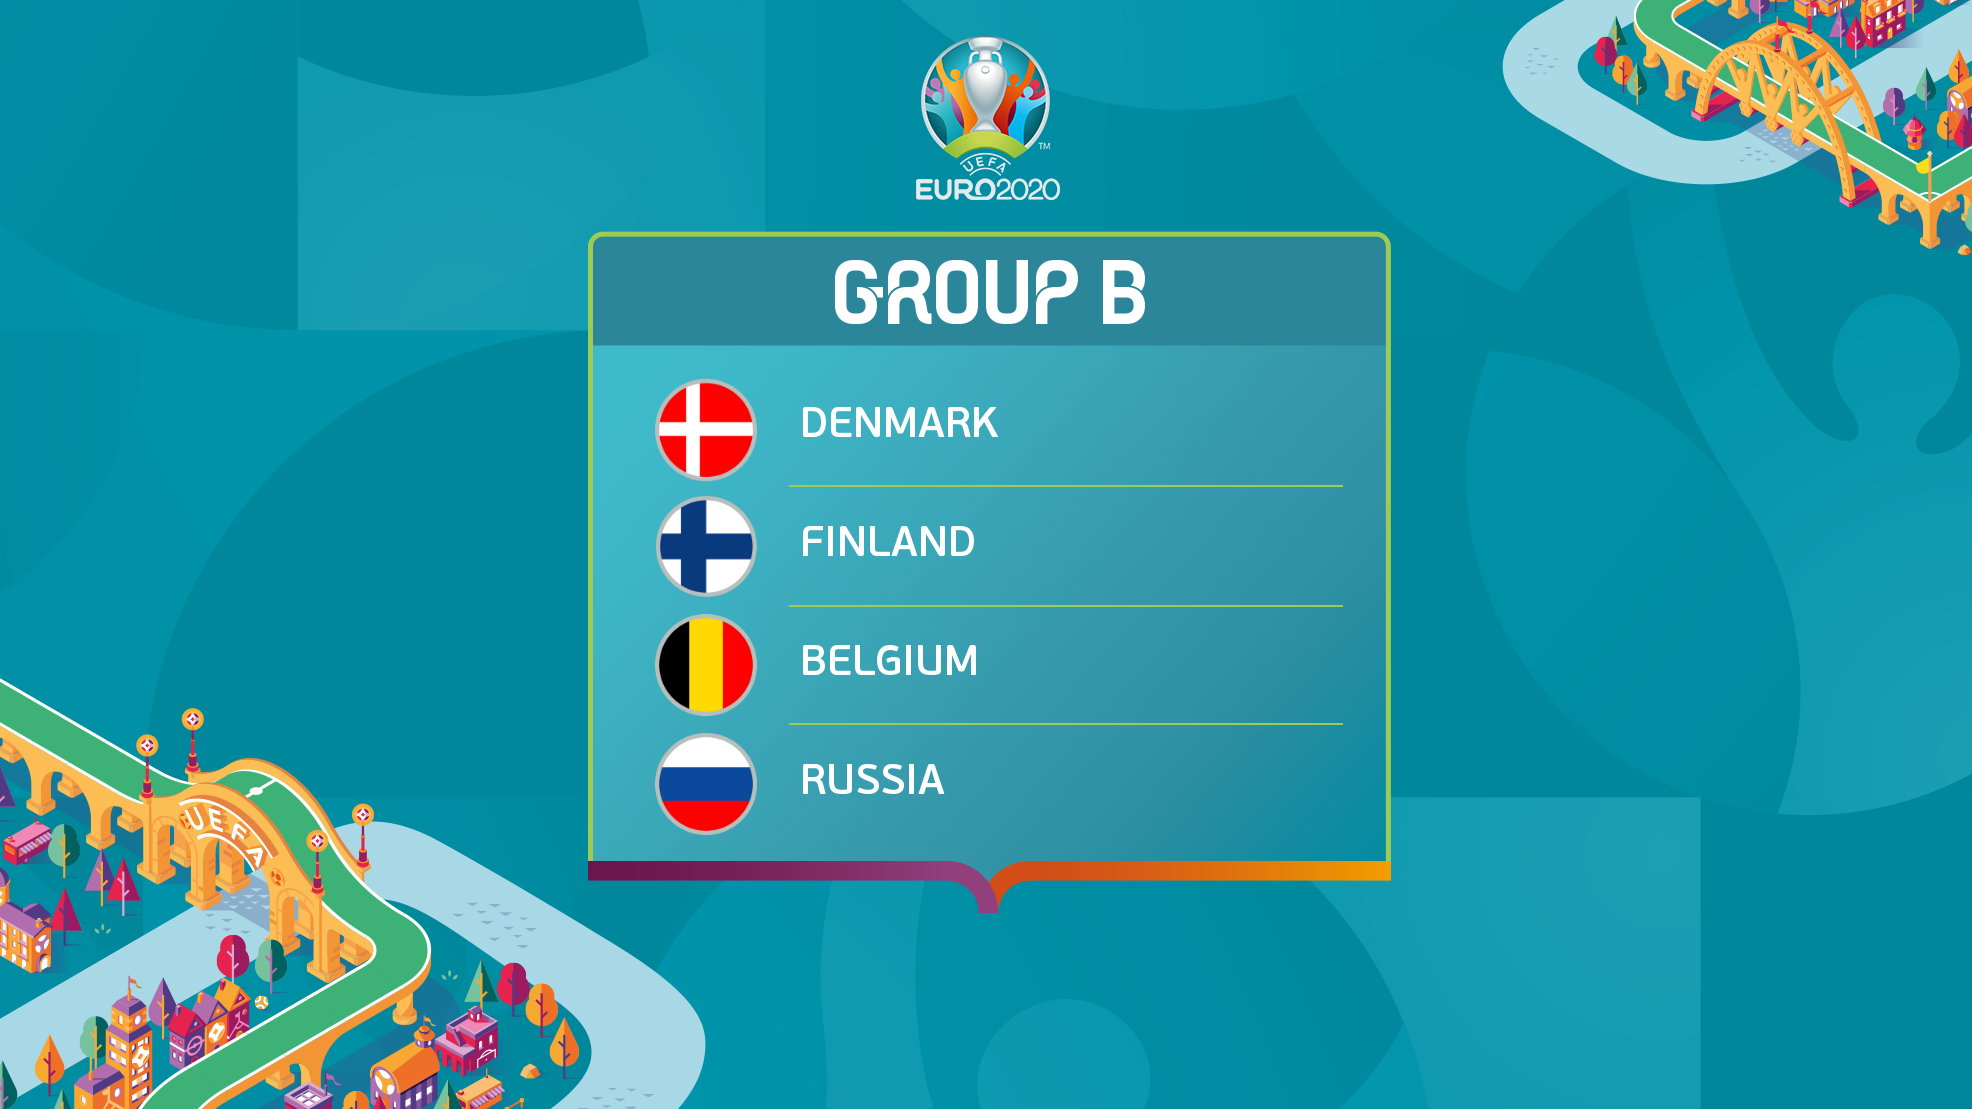 Group B Preview